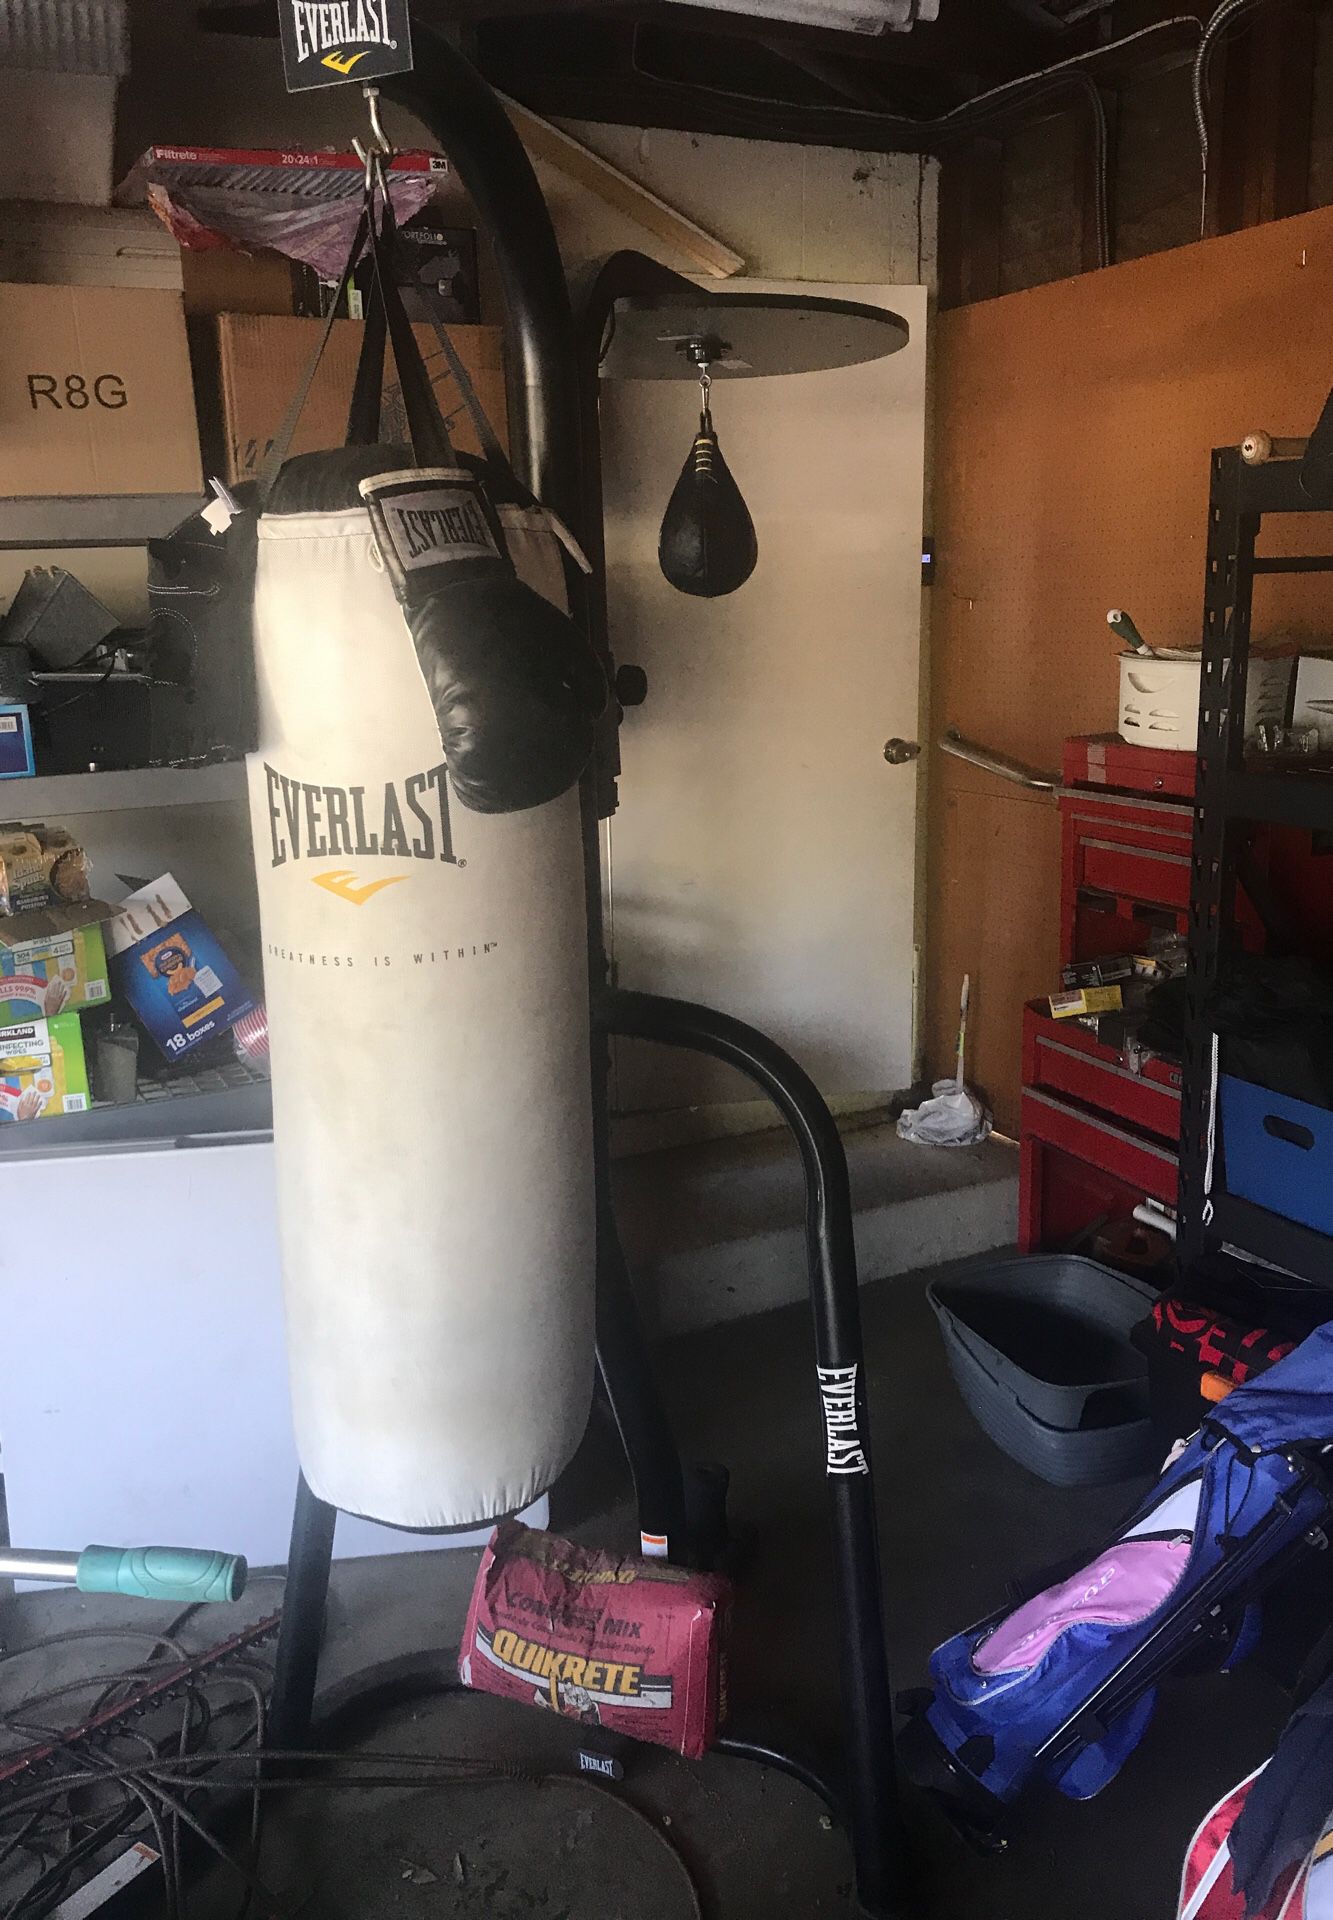 Ever last weight bag stand.